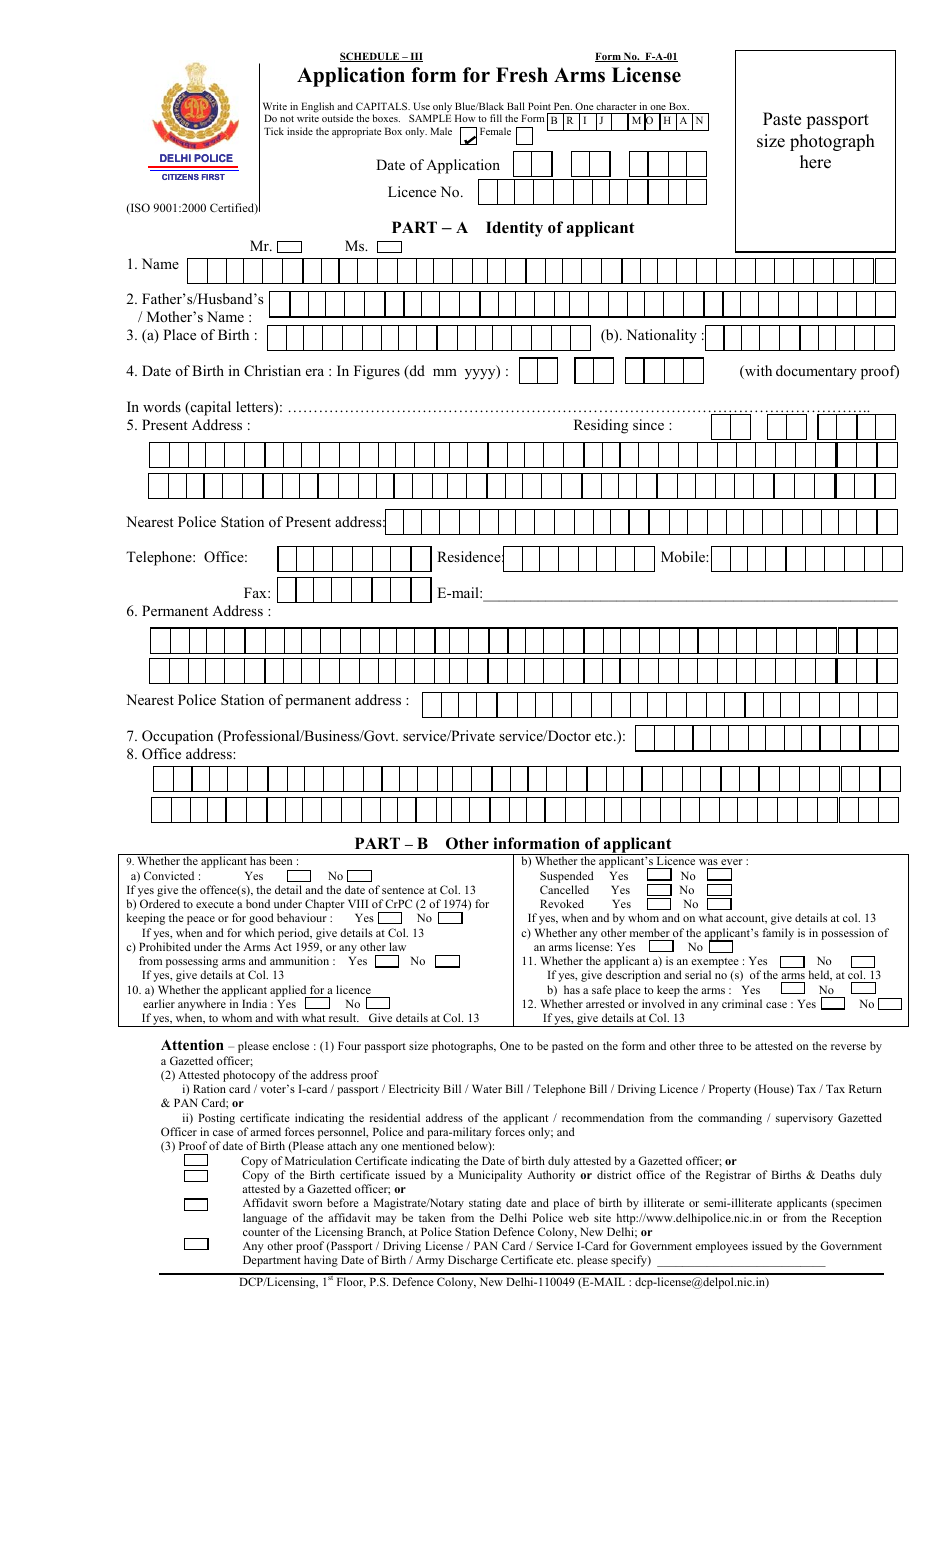 Form F-A-01 Application Form for Fresh Arms License - Delhi, India, Page 1